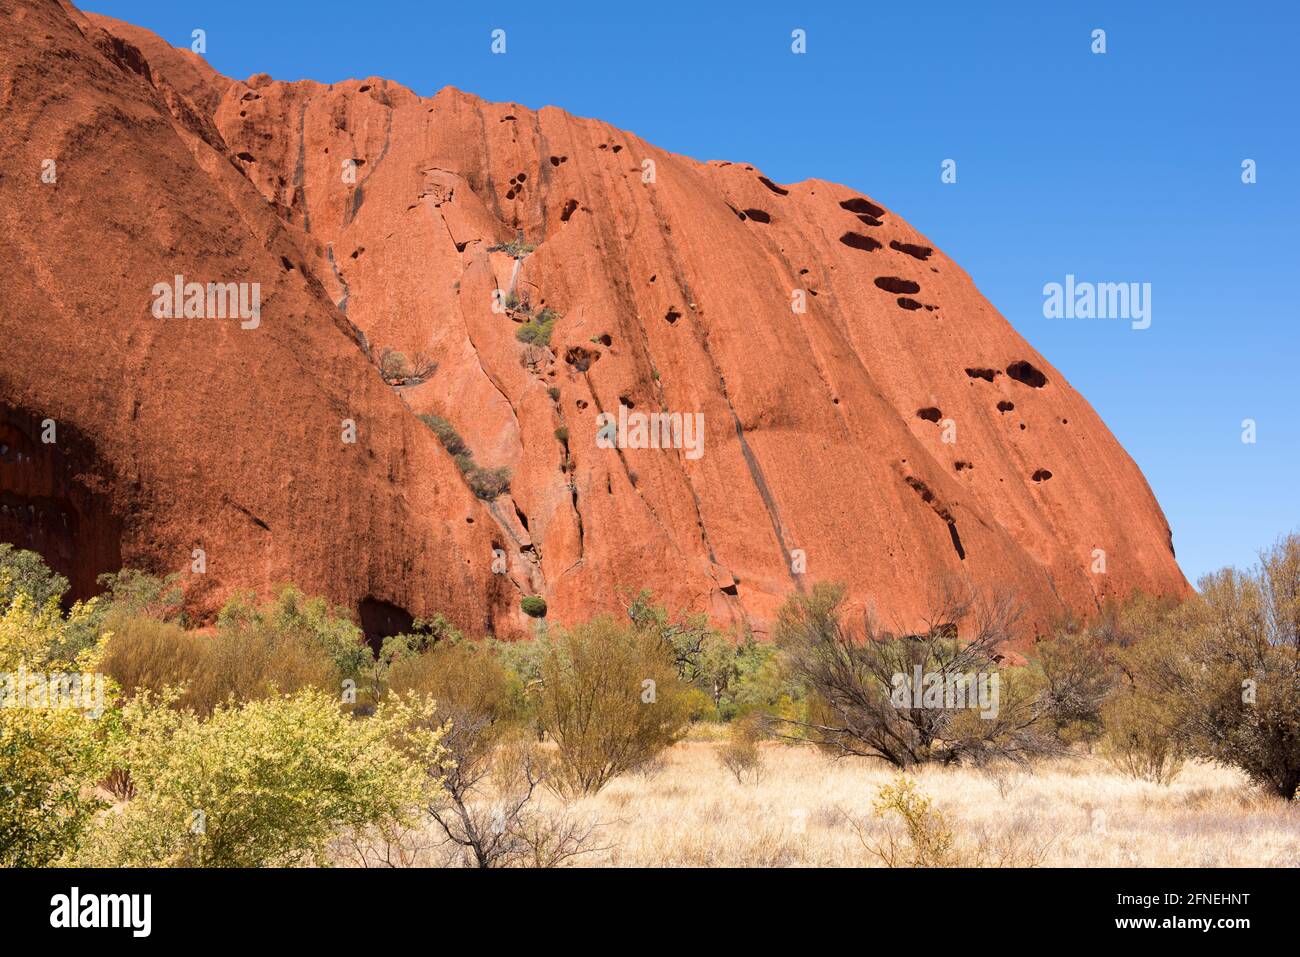 Uluru (Ayers Rock), Northern Territory, Australia, September 2018.  This imposing geological structure is the world's largest rock monolith. Stock Photo